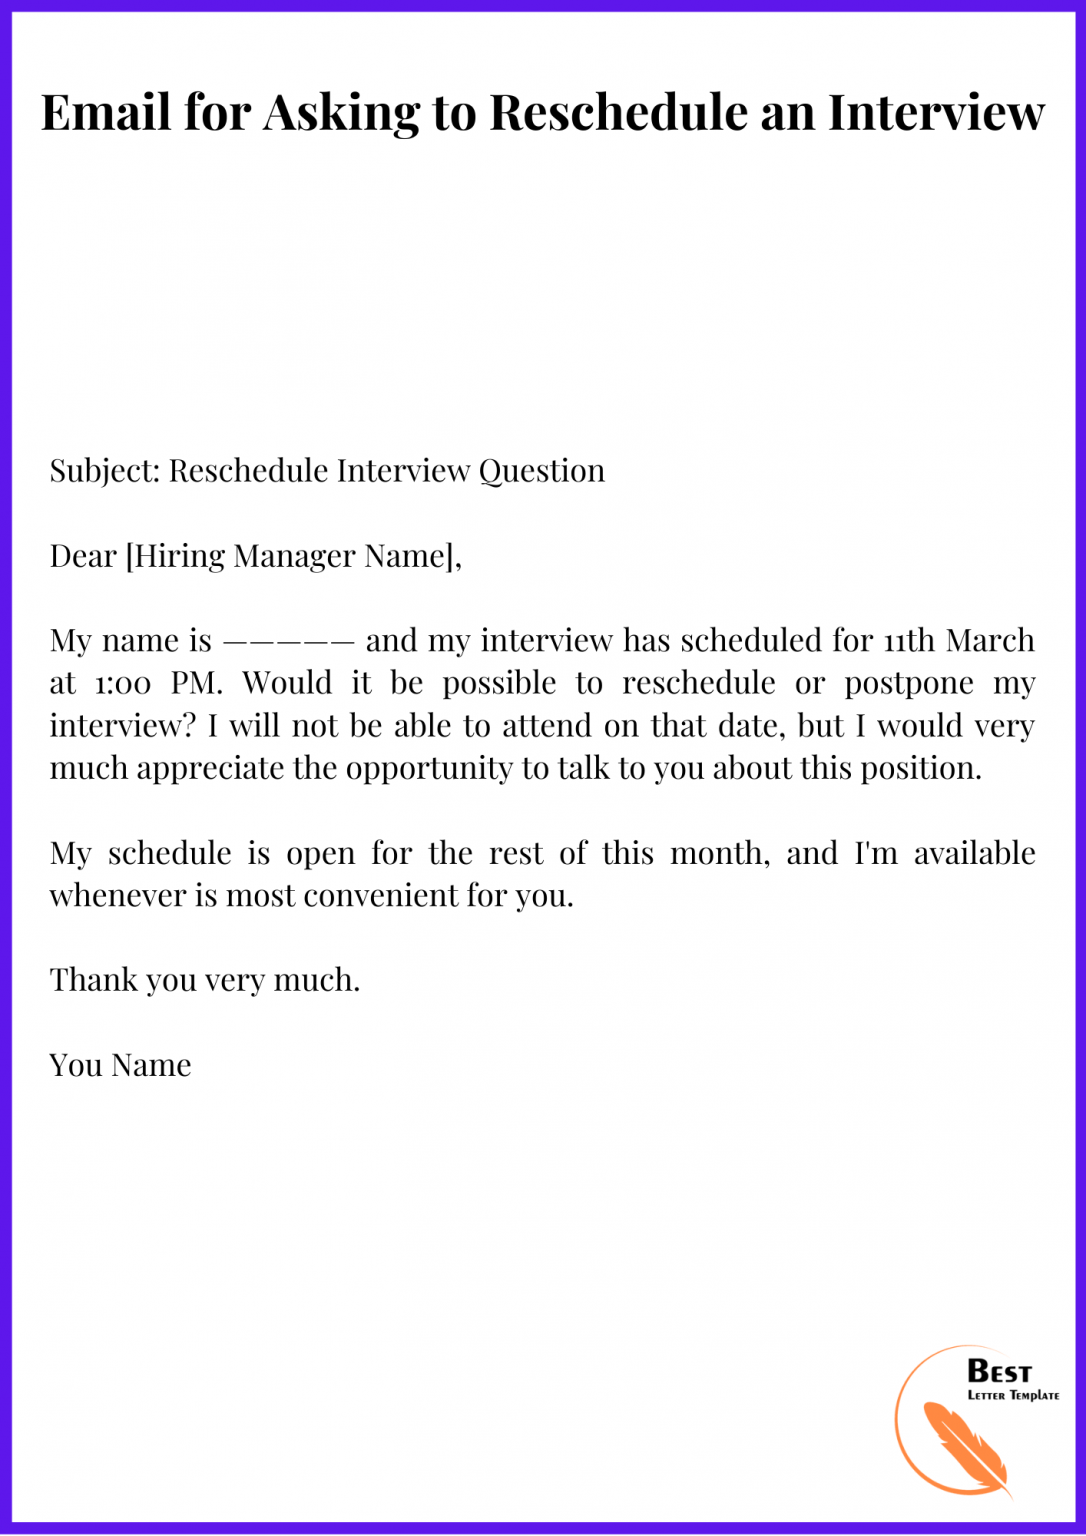 Request For Interview Email Template